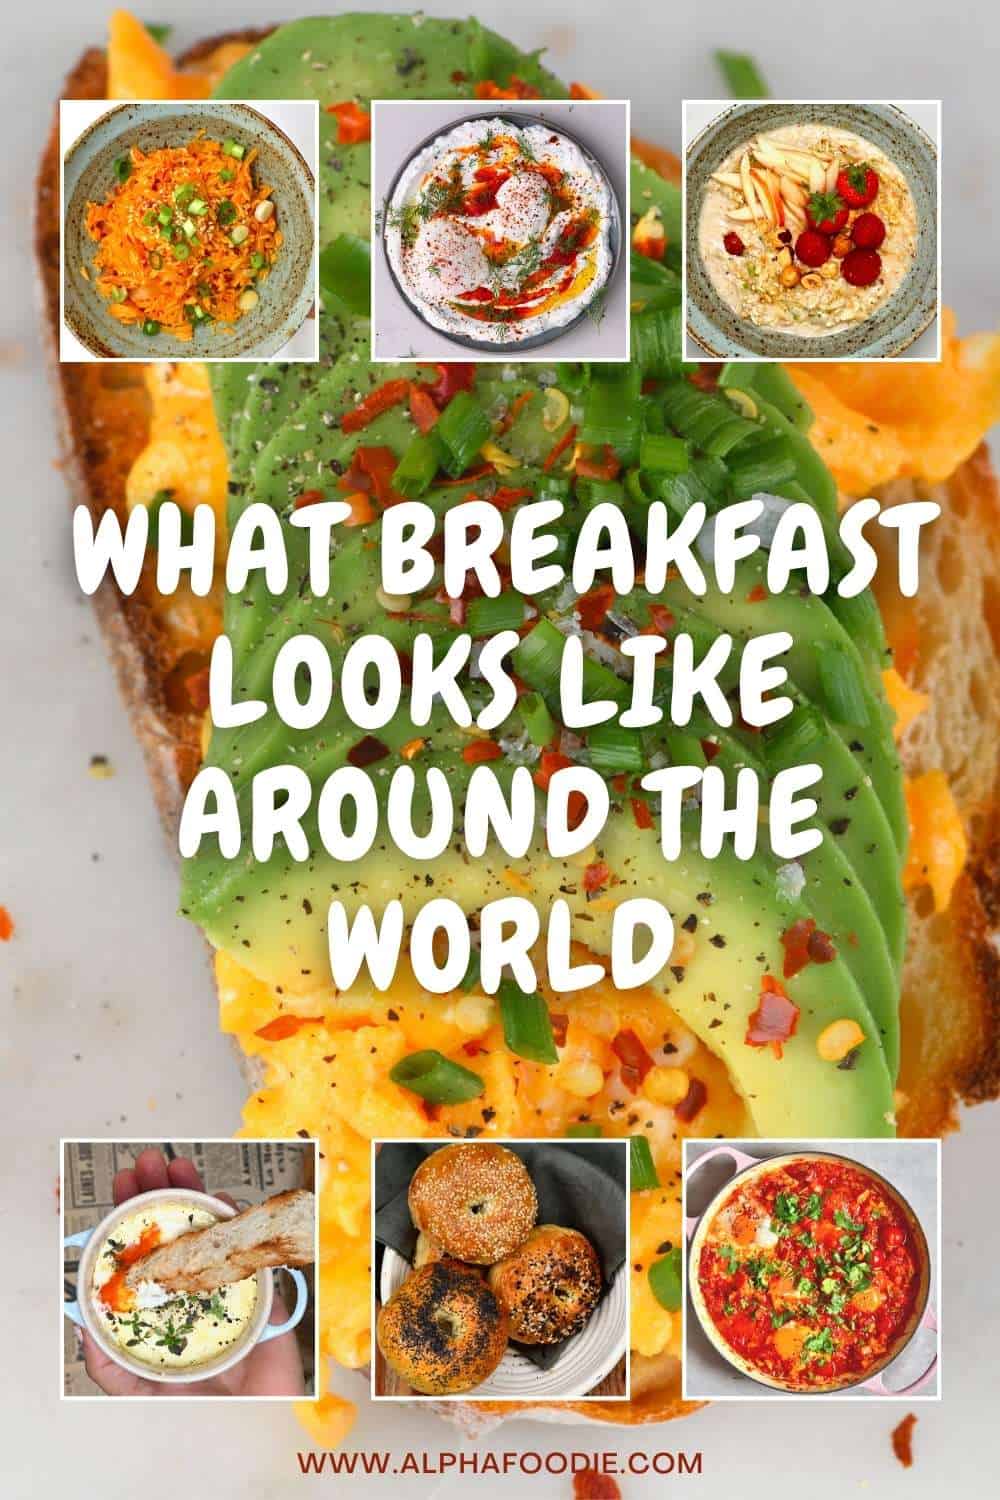 25+ Breakfasts From Around The World - Alphafoodie